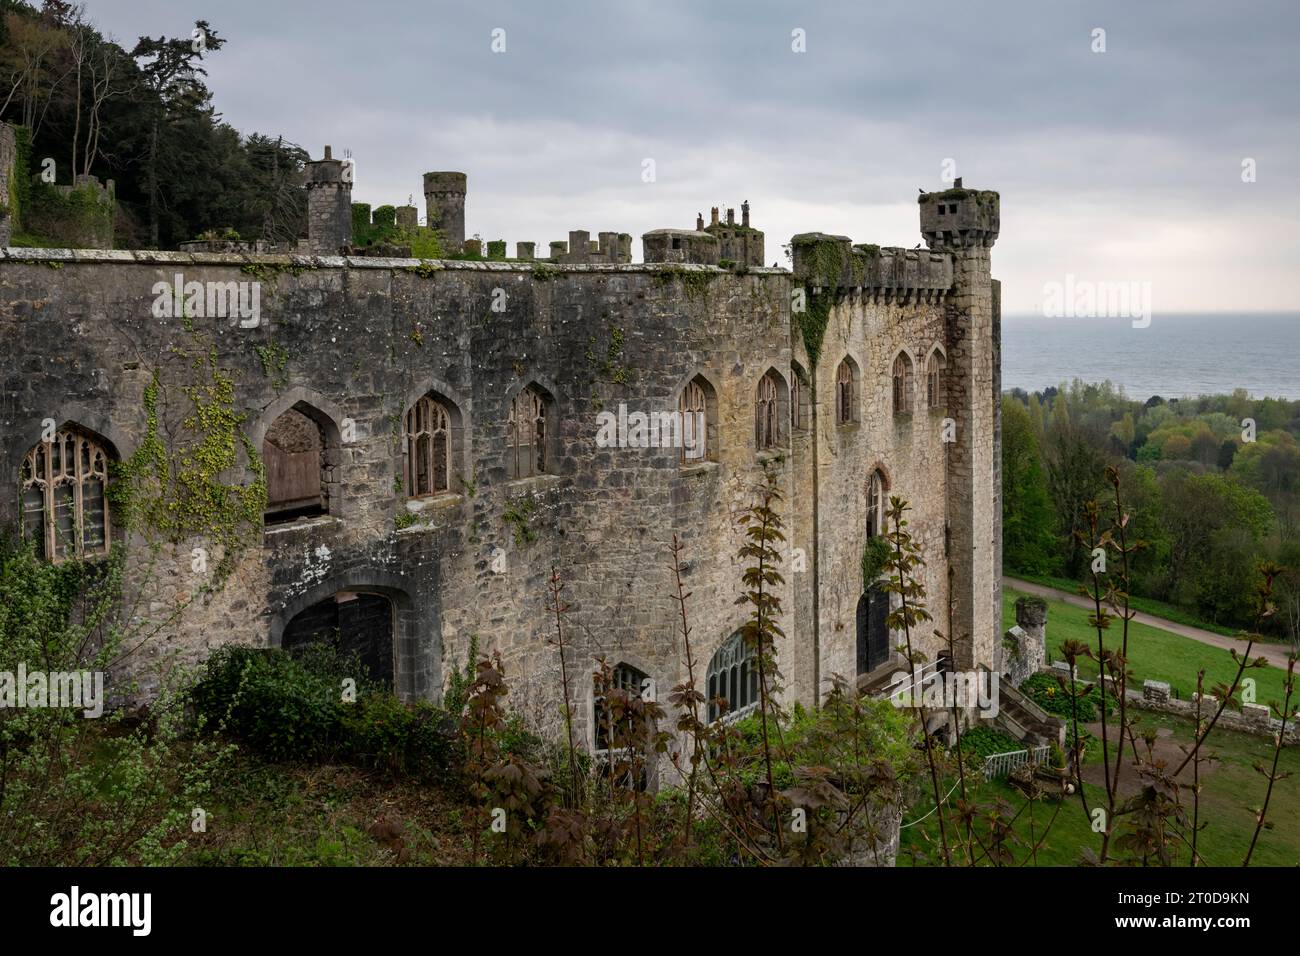 Gwrych Castle, Abergele, North Wales. A 19th century country house being restored and open to the public. Stock Photo